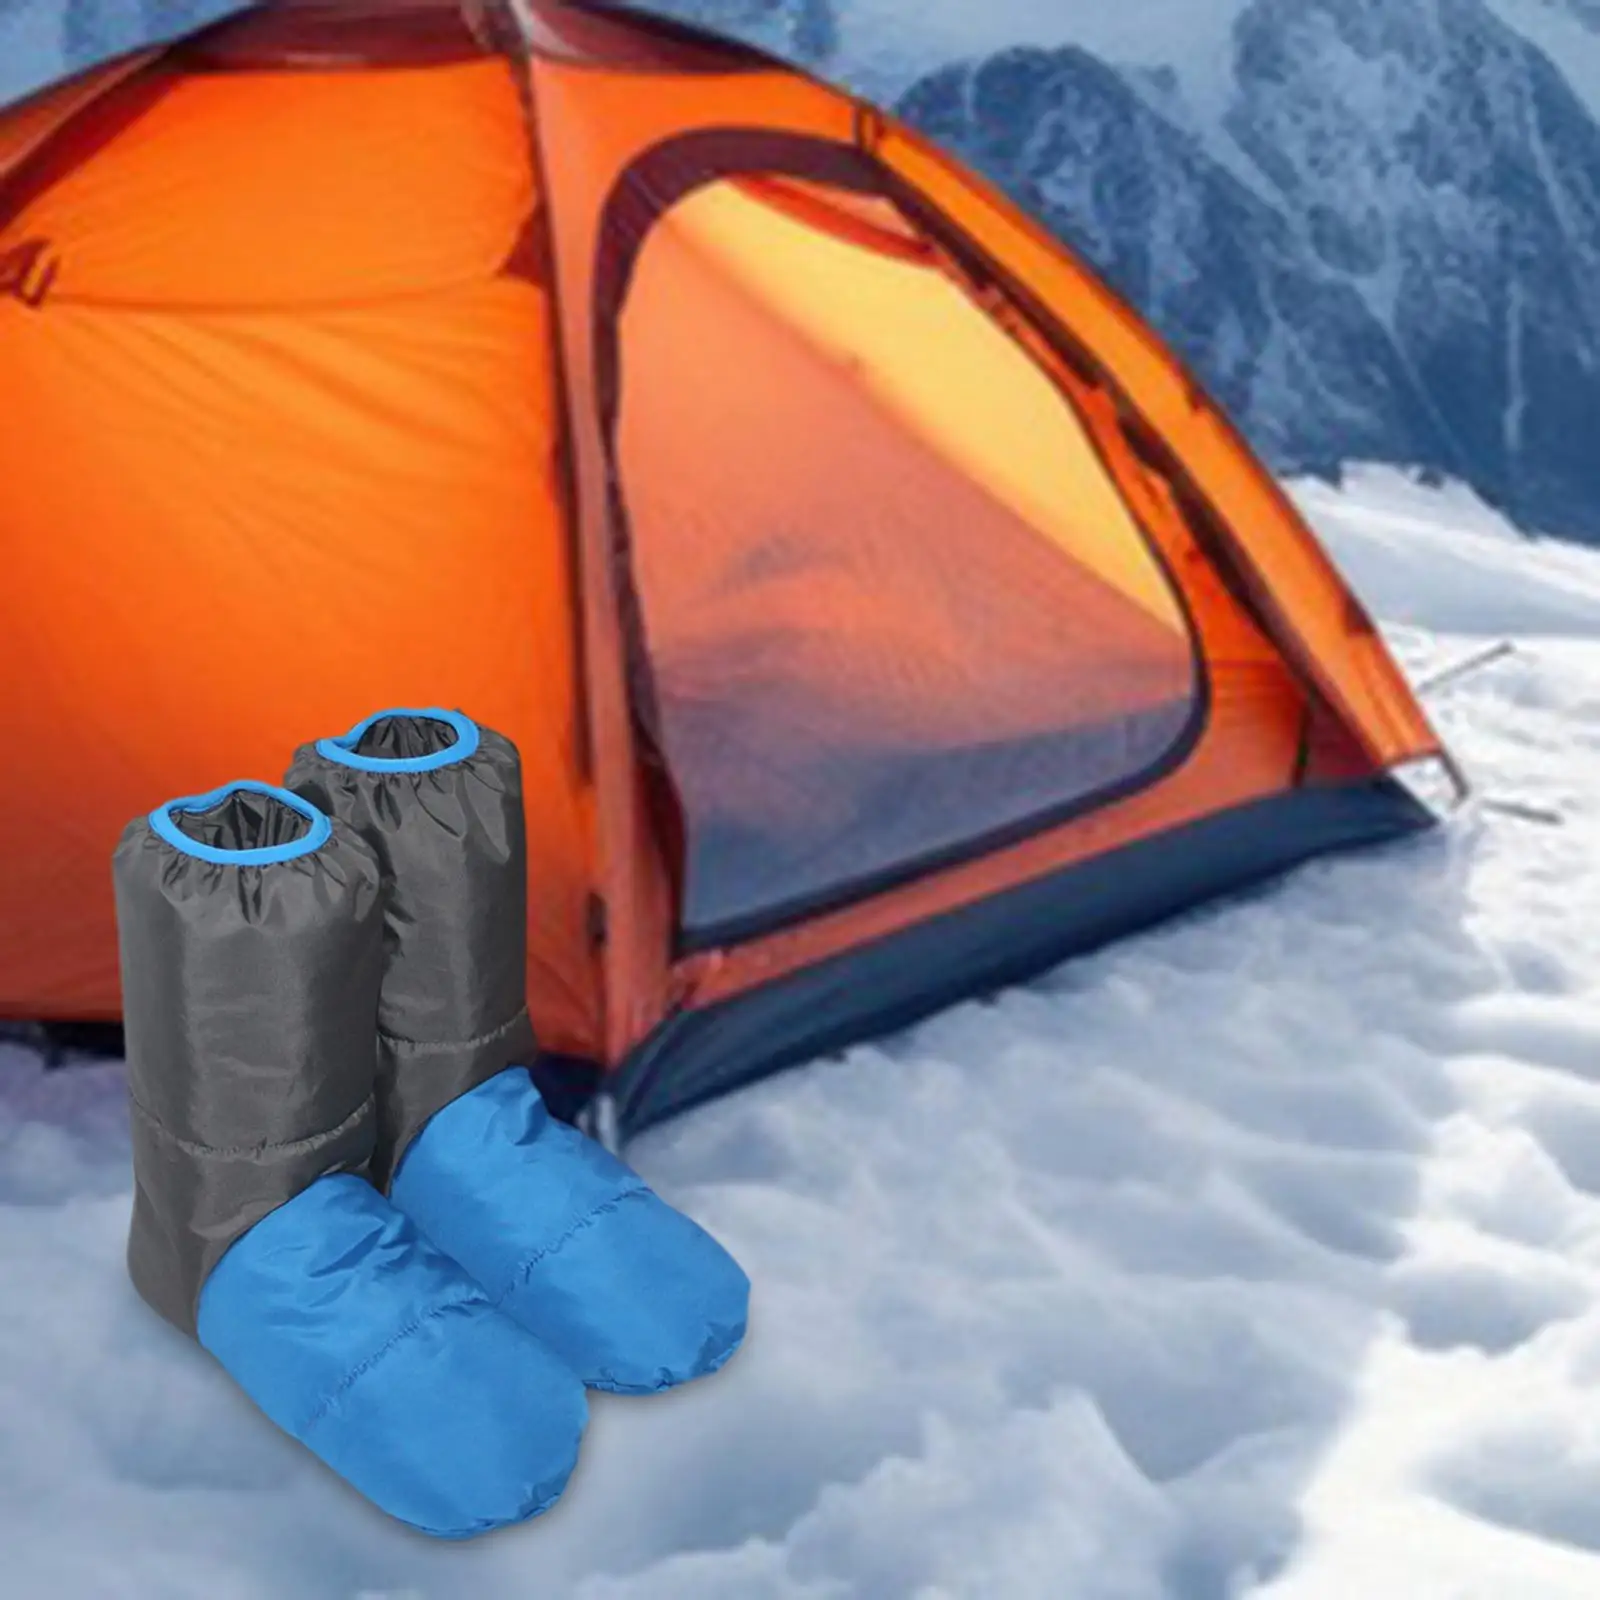 Down Booties Down Slipper Boots Down Shoes Non Slip Sleeping Slippers Warm Socks for Camping Fishing Men Women Tent